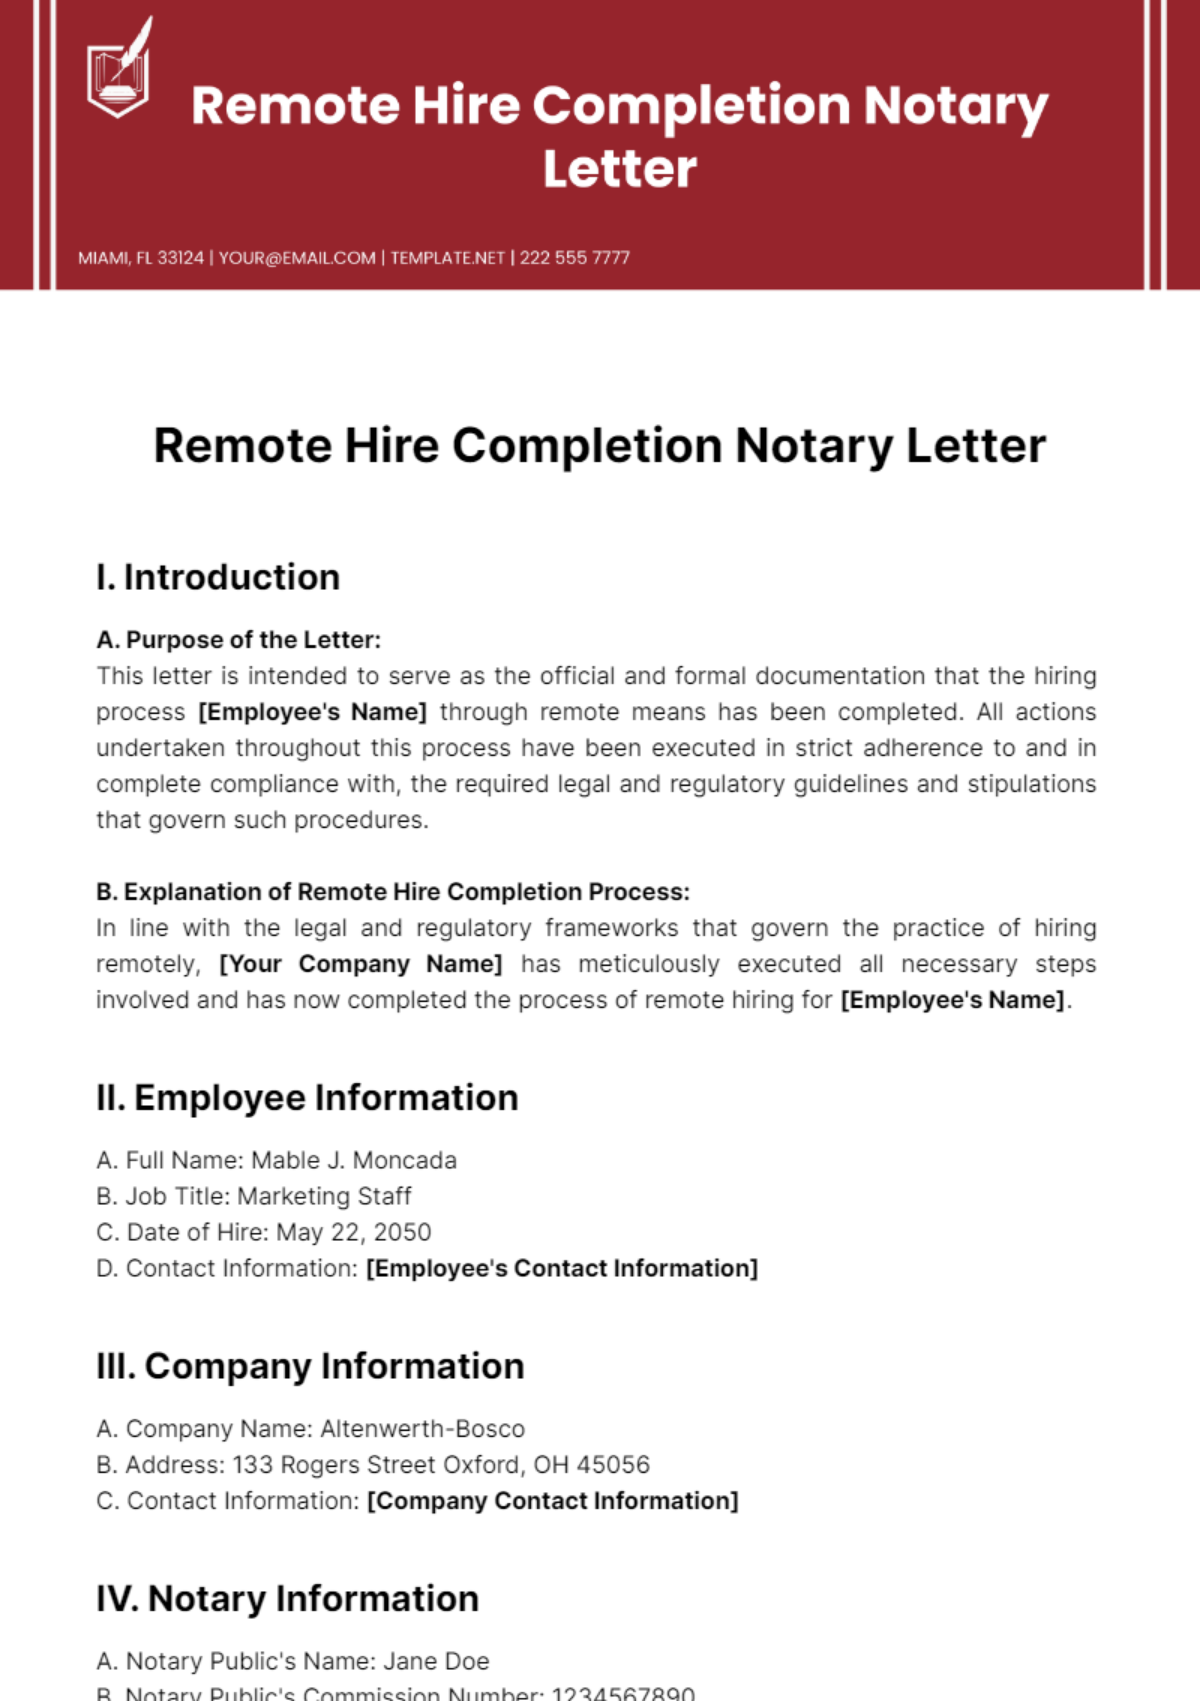 Remote Hire Completion Notary Letter Template